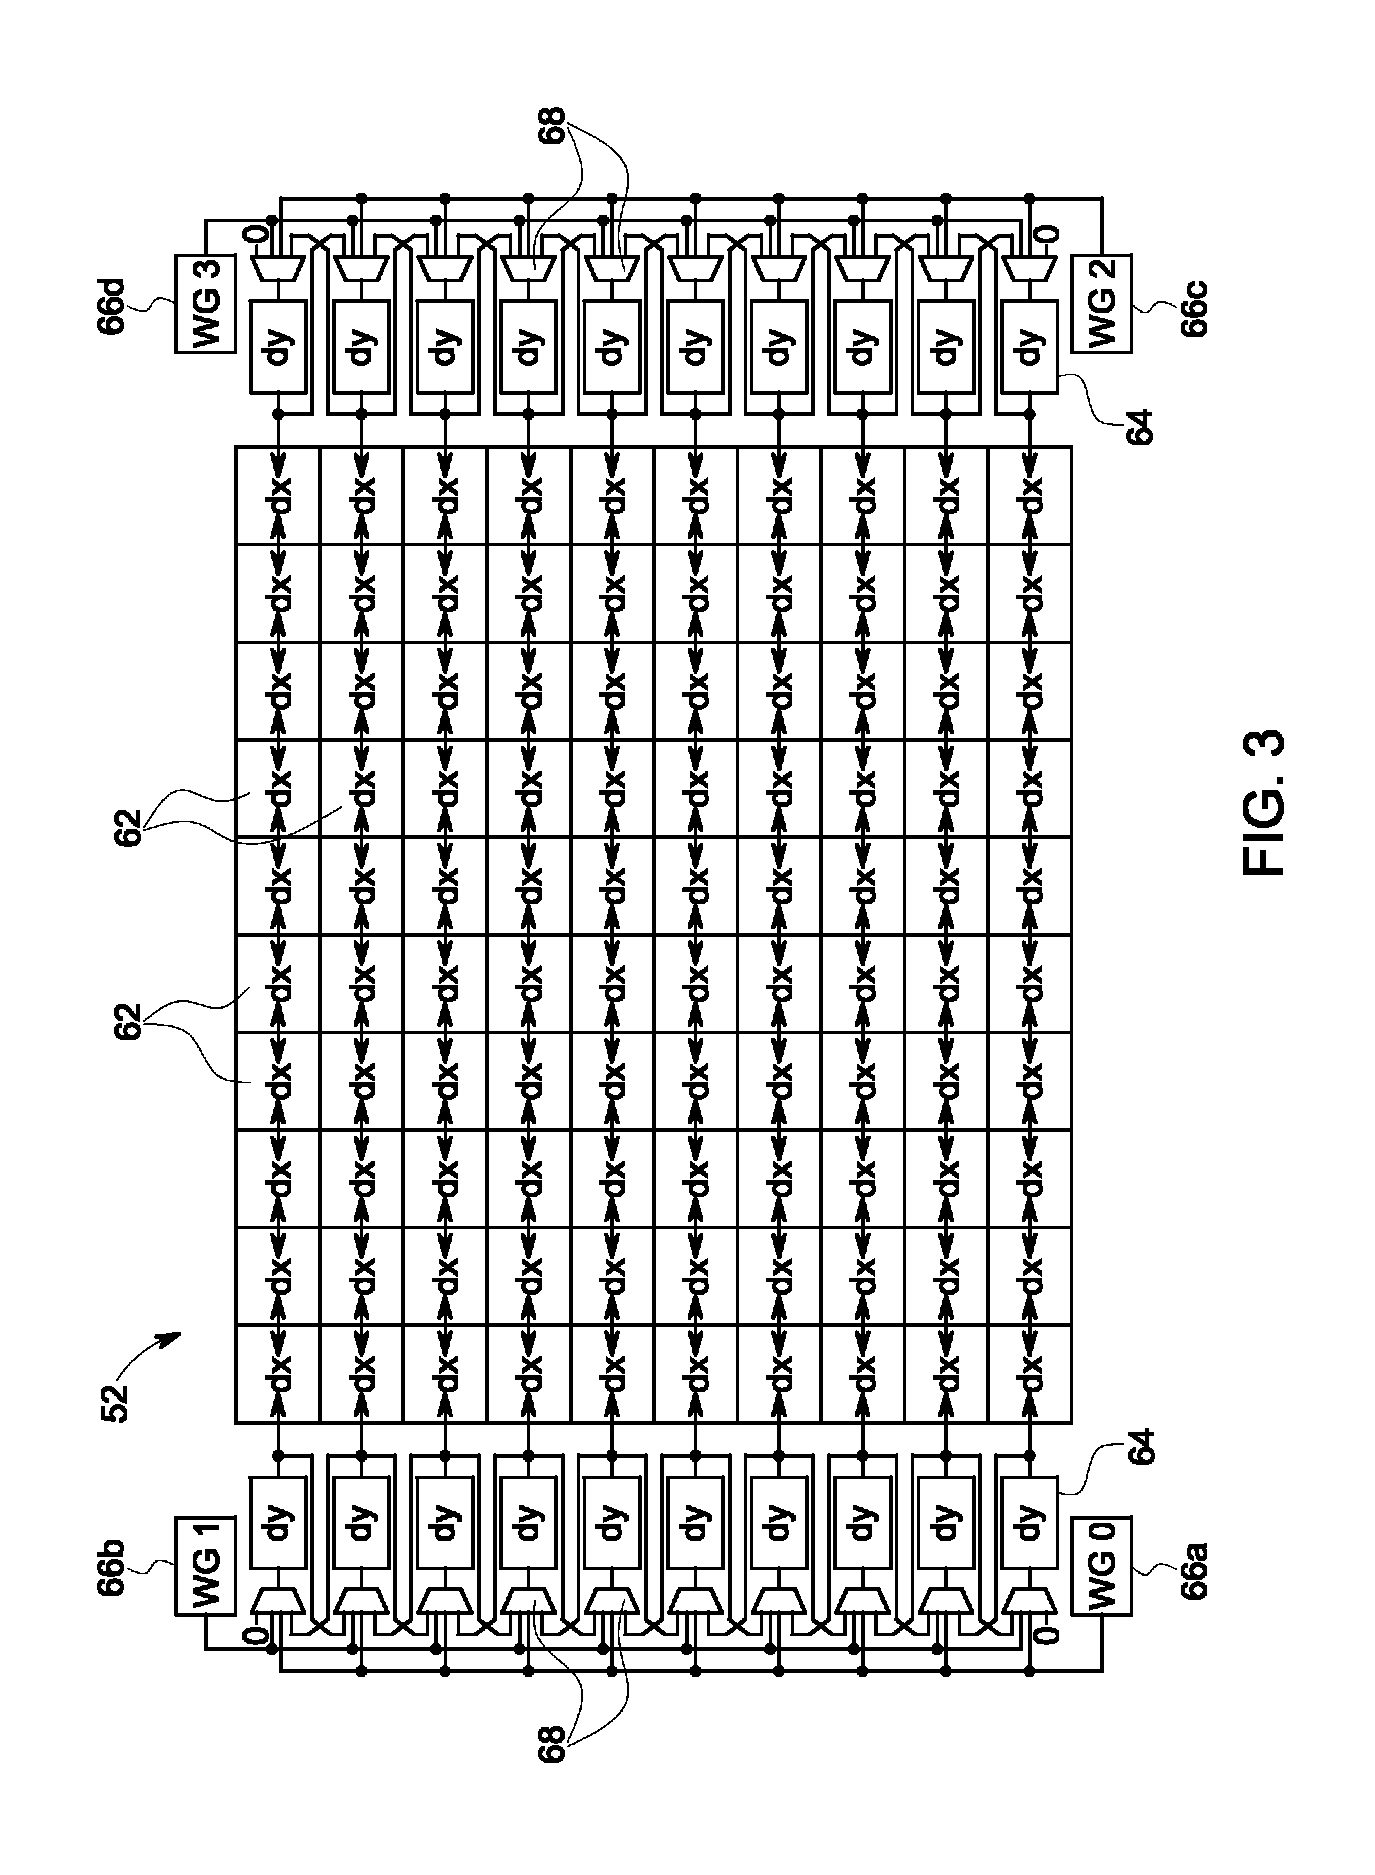 Delta delay approach for ultrasound beamforming on an ASIC